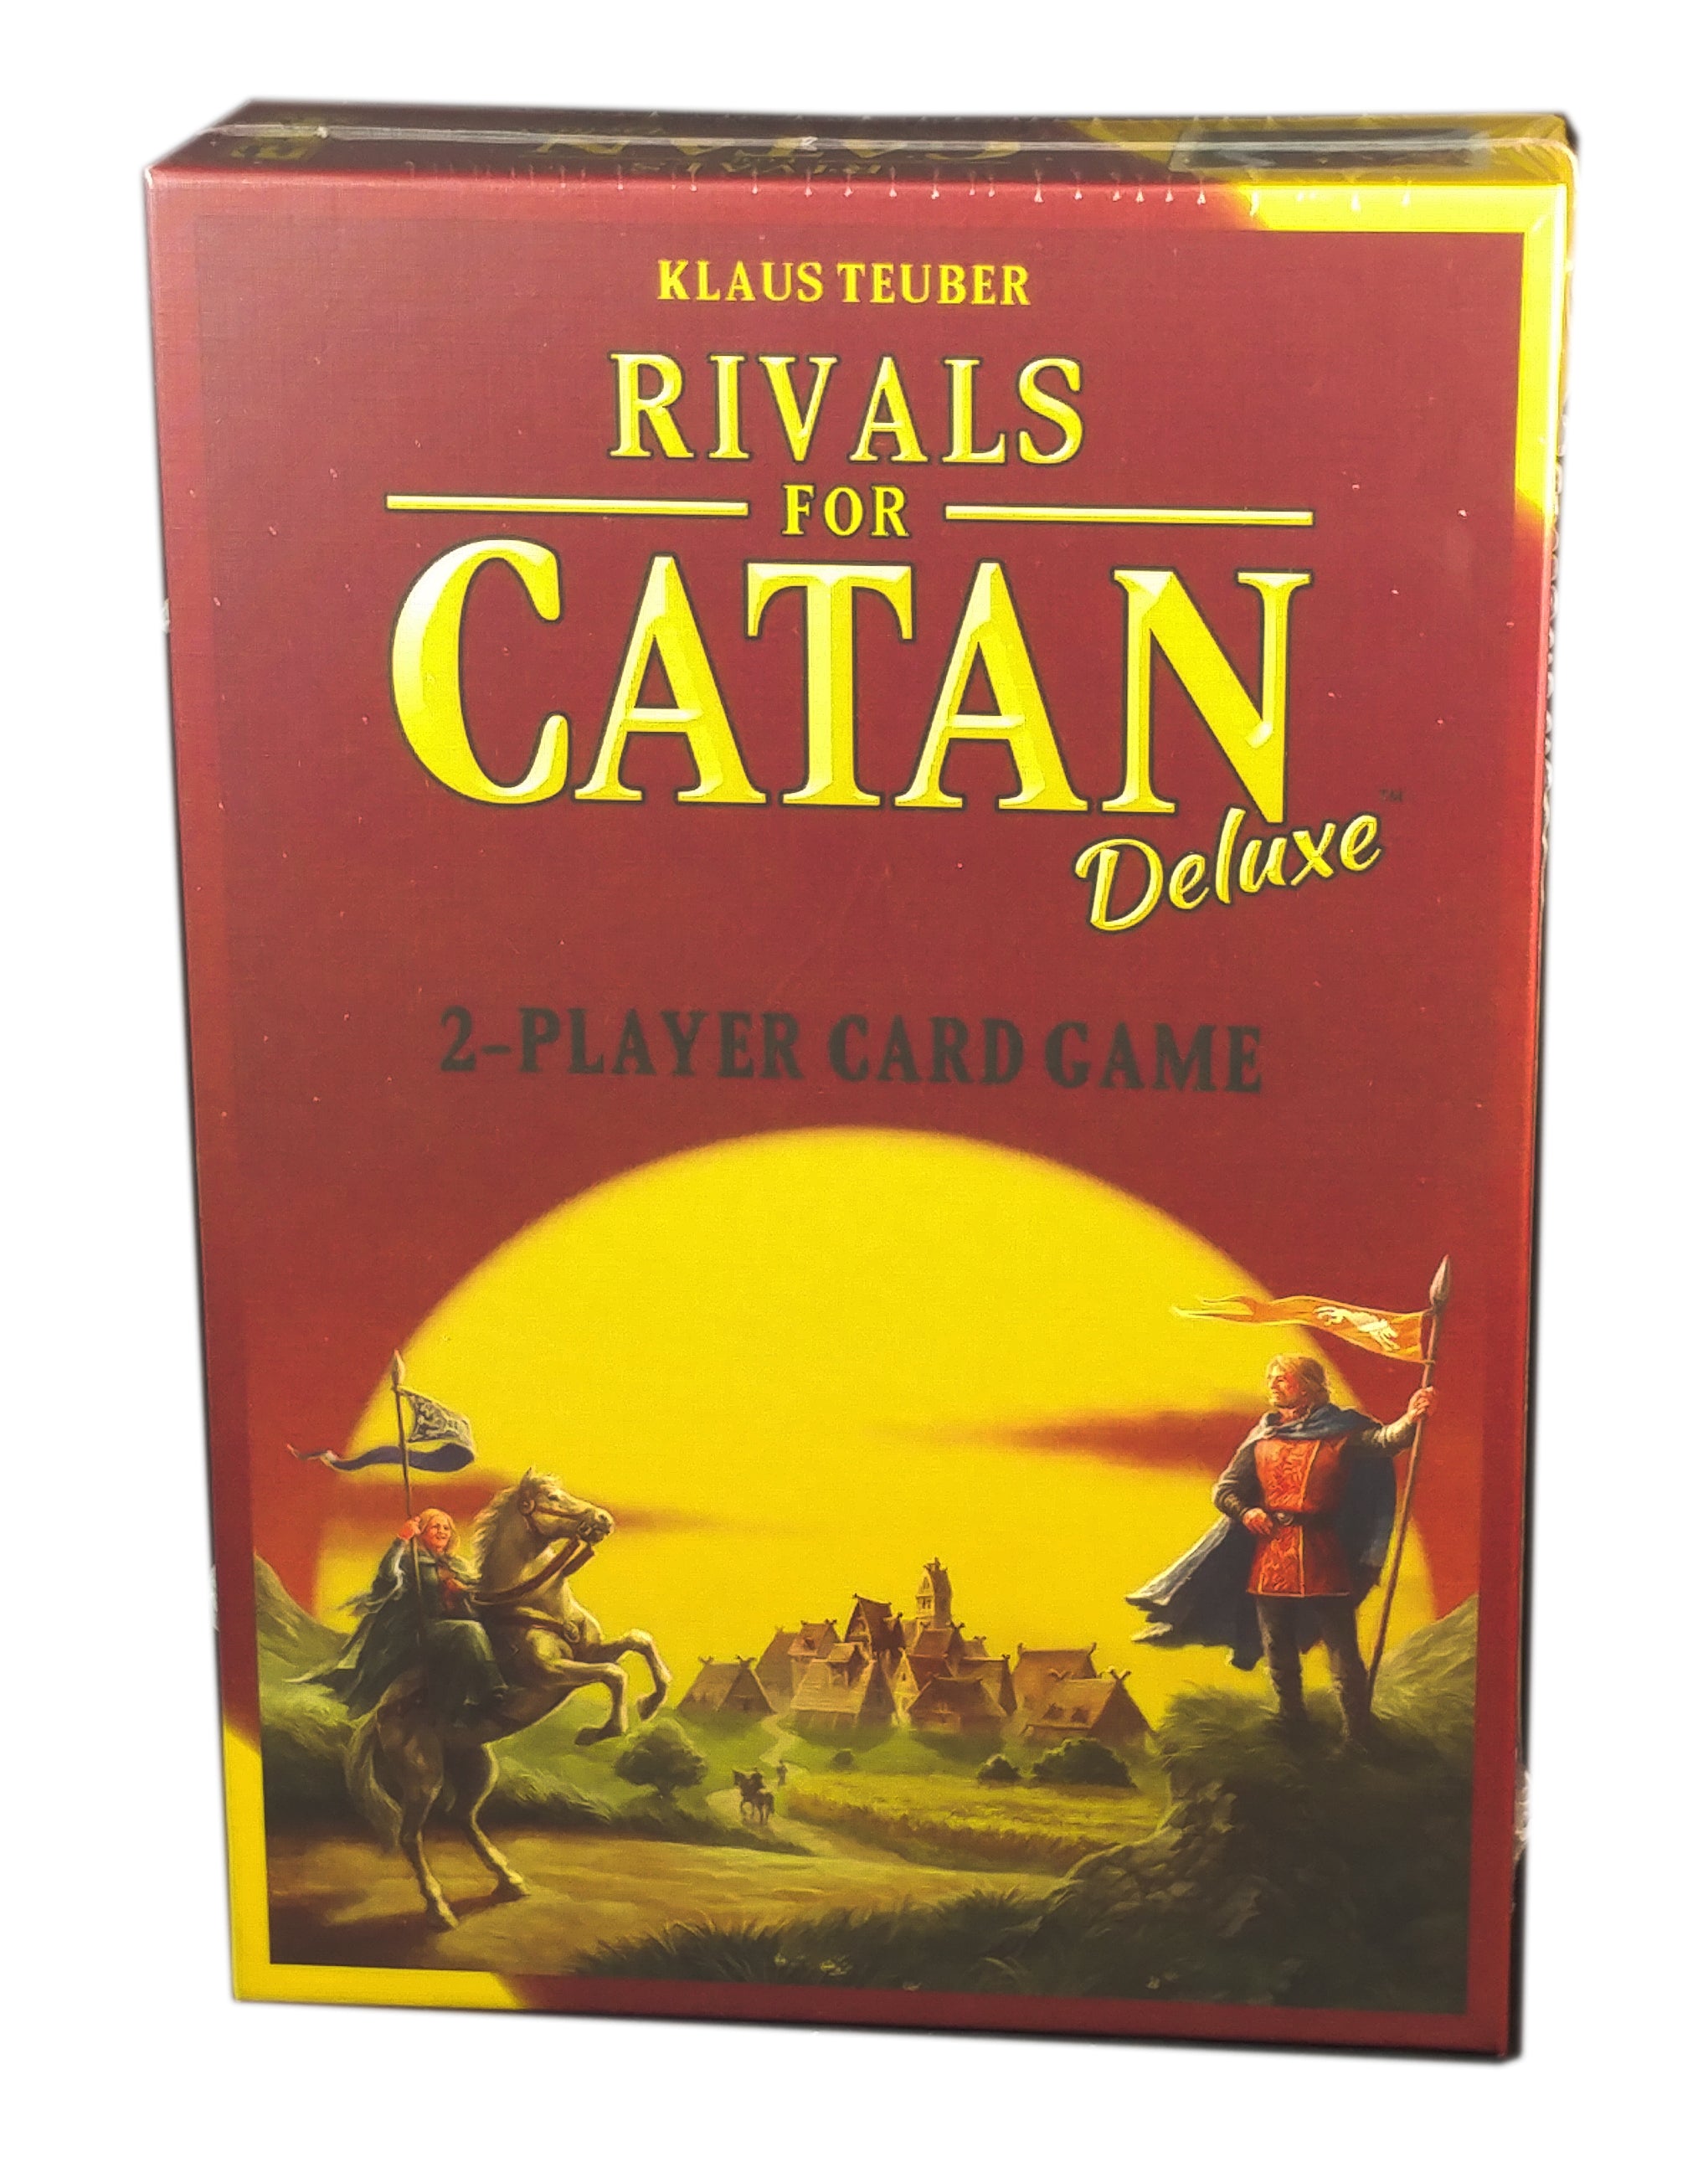 Rivals for Catan Deluxe 2-Players Card Game